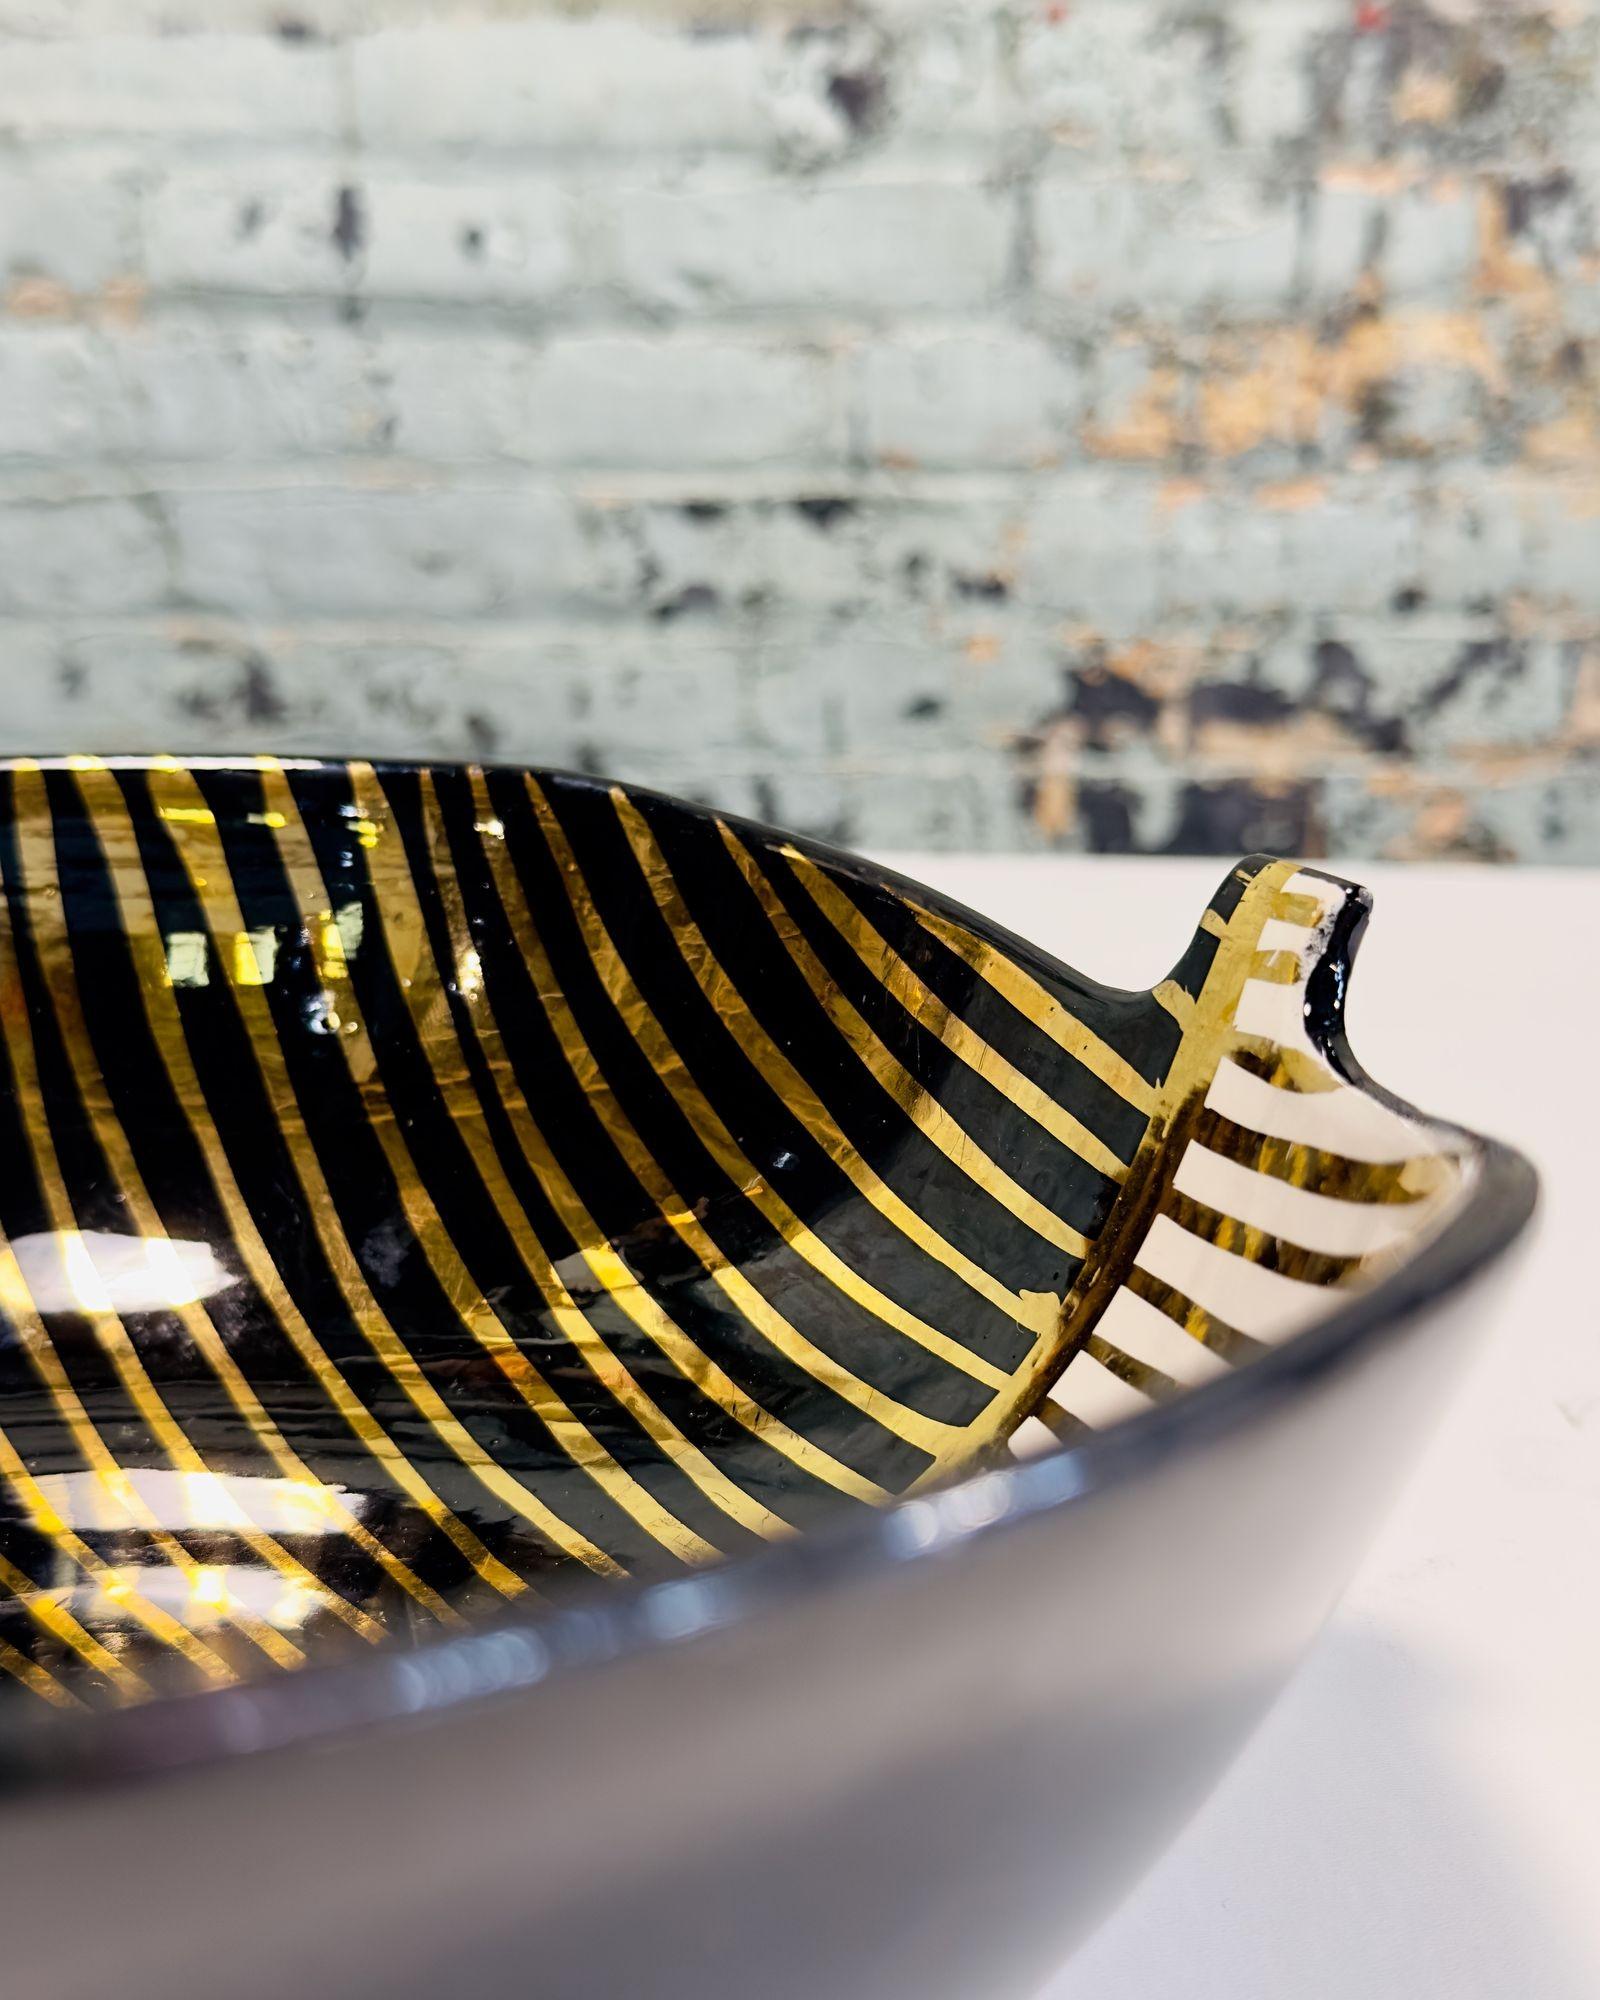 Bitossi Raymor Bowl Ceramic Black/White and Gold Leaf, 1960.
Bowl is in excellent condition. Marked on bottom 95/501 Italy